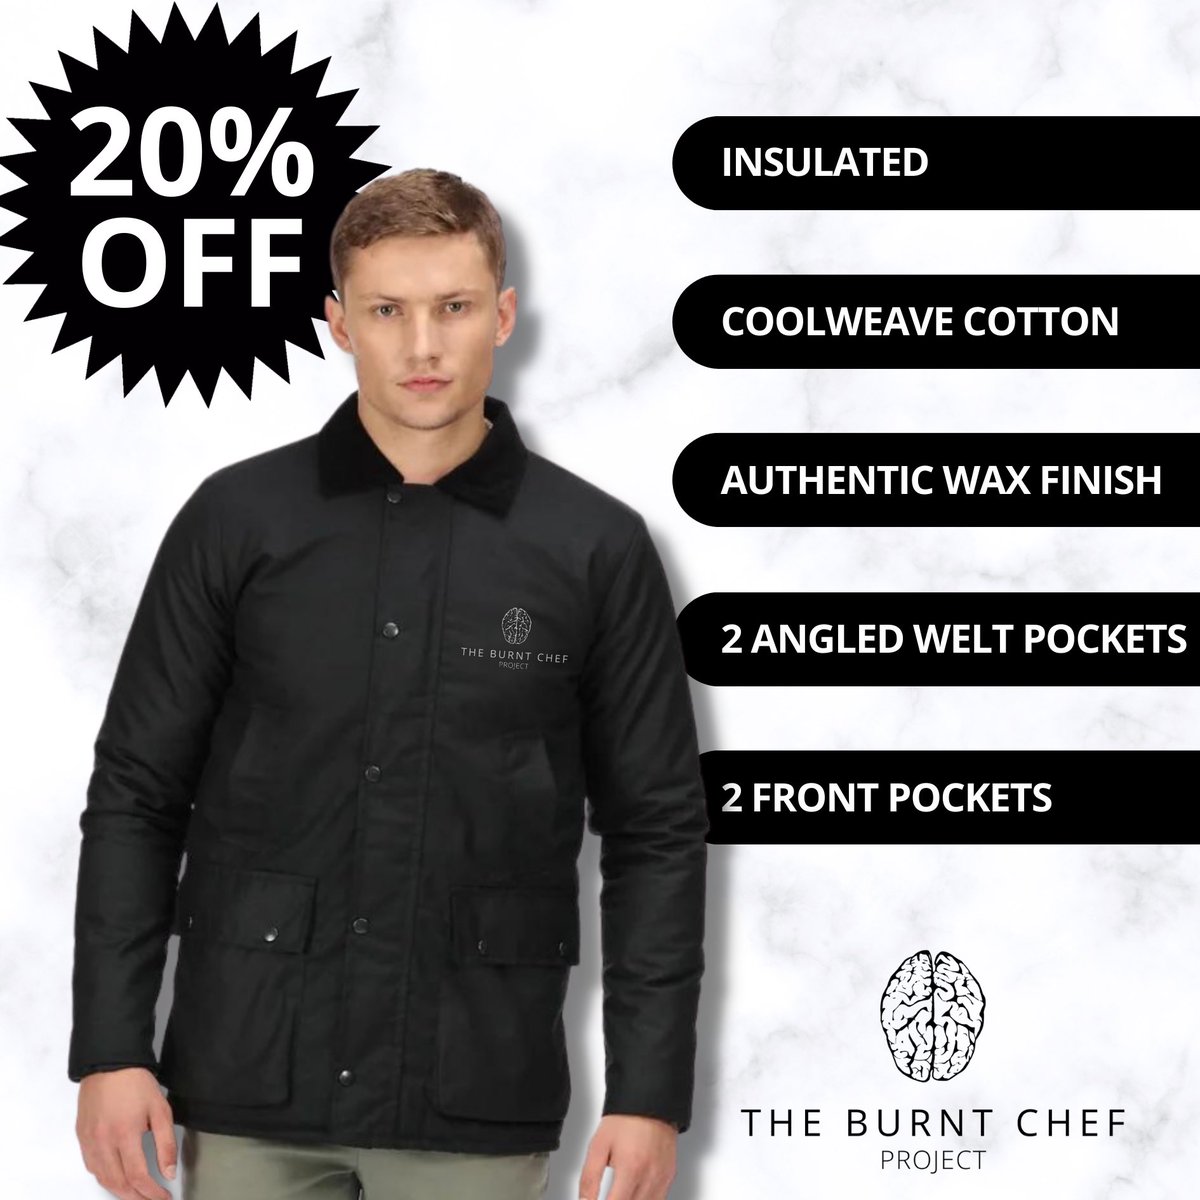 Combine practicality, style and warmth in The Burnt Chef Wax Jacket.

𝗡𝗼𝘄 𝘄𝗶𝘁𝗵 𝟮𝟬% 𝗢𝗙𝗙 𝗯𝗼𝘁𝗵 𝗺𝗲𝗻𝘀 & 𝘄𝗼𝗺𝗲𝗻𝘀 𝘀𝘁𝘆𝗹𝗲𝘀!

Get the job done in style!

Order yours now👇
theburntchefproject.com/hats-coats

#hospitalitysupport #merchandise #countrywear